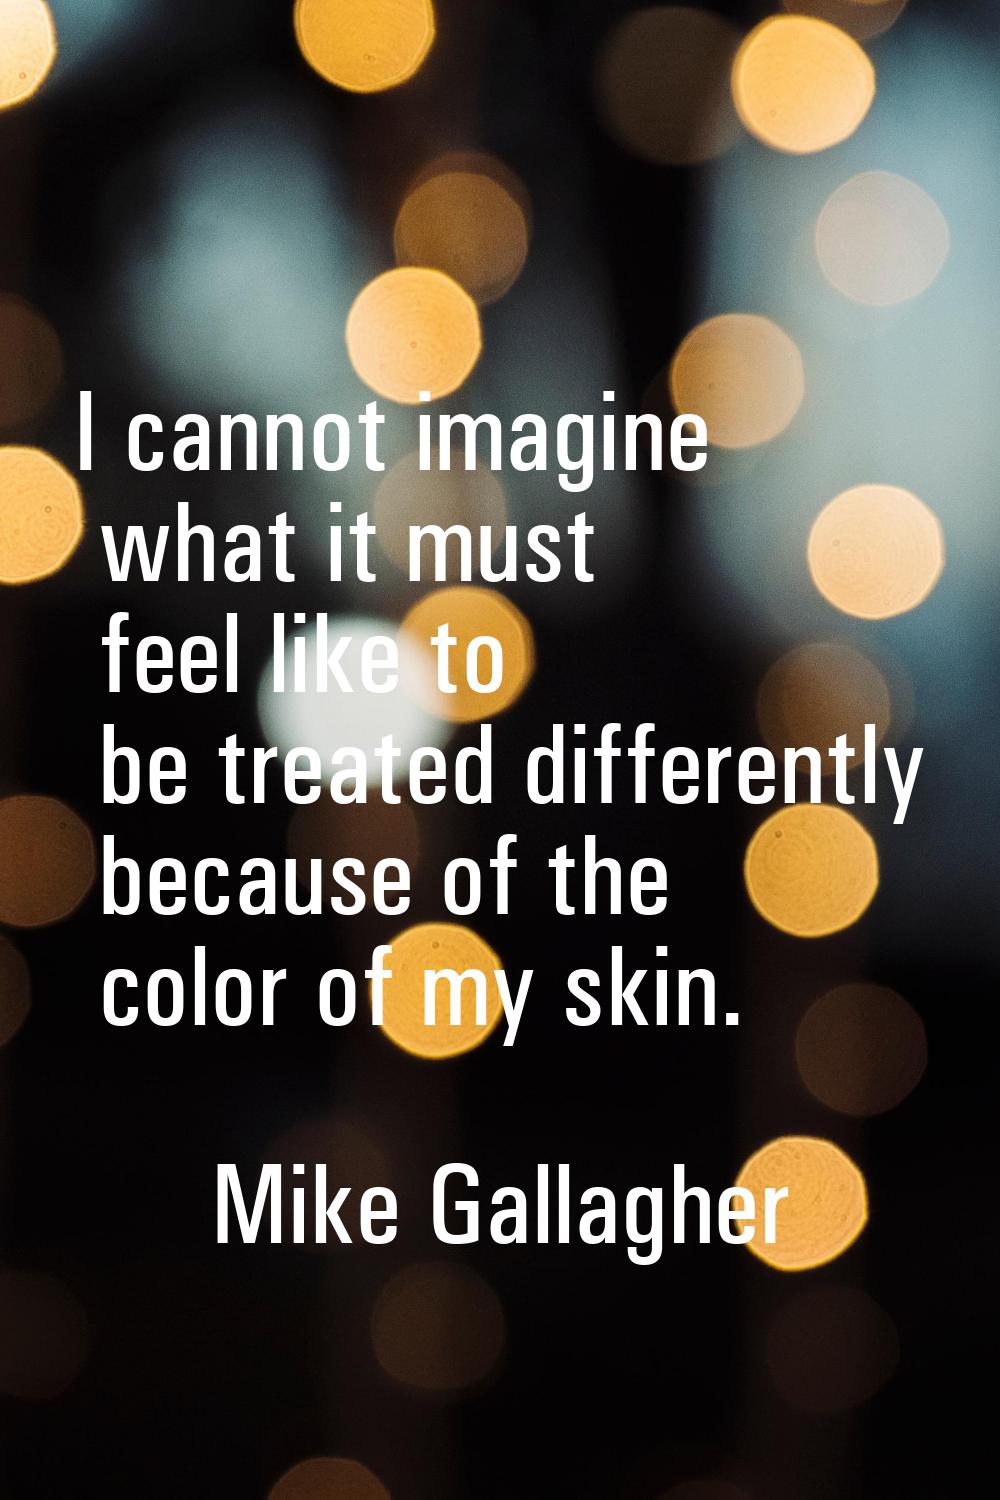 I cannot imagine what it must feel like to be treated differently because of the color of my skin.